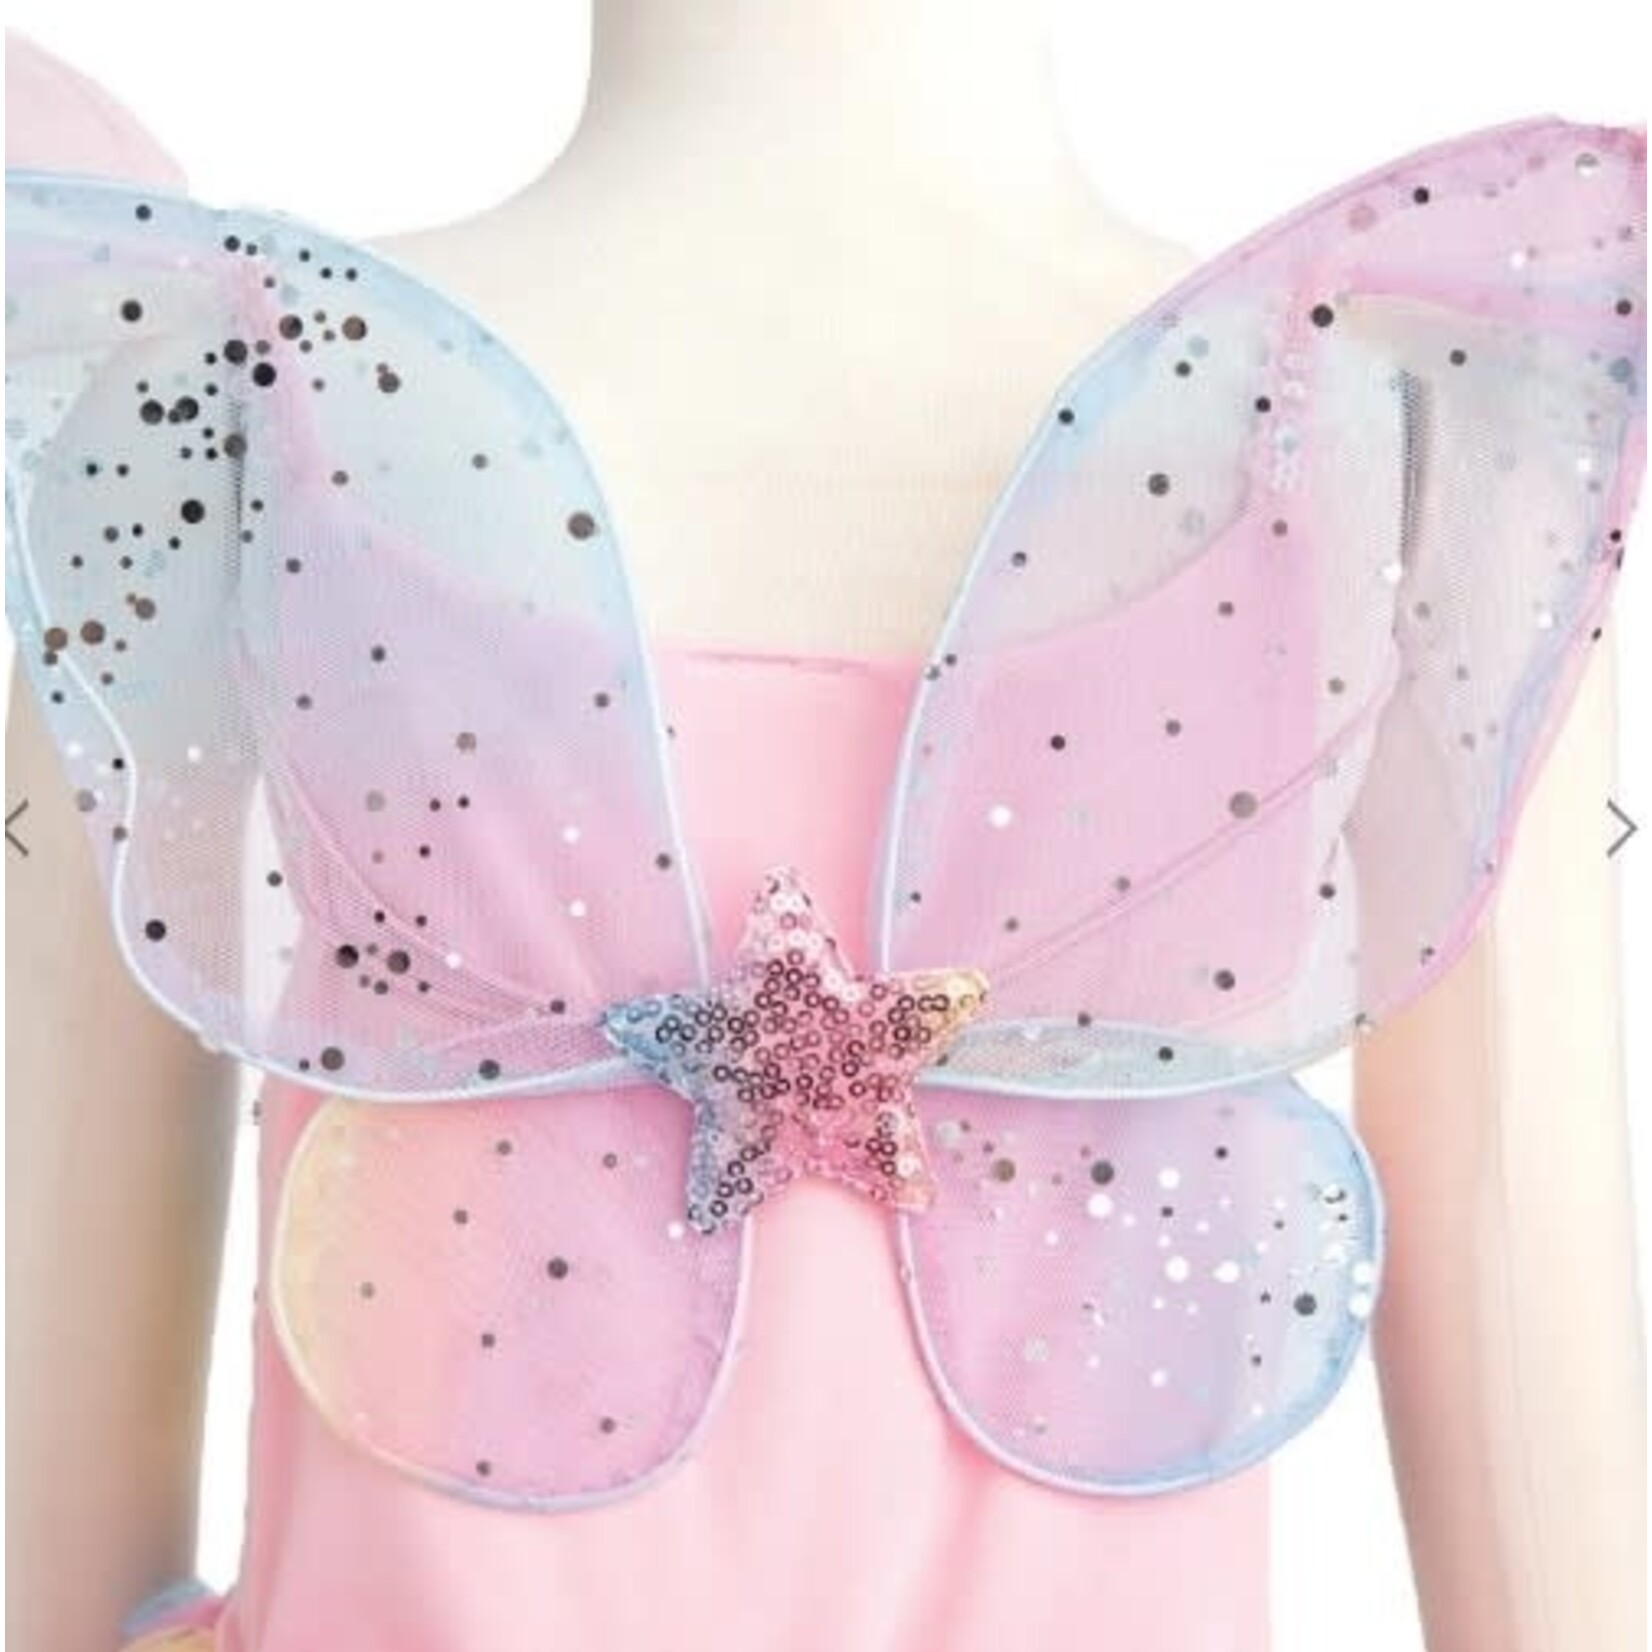 Great Pretenders GREAT PRETENDERS - Multicoloured dress with tutu and butterfly wings